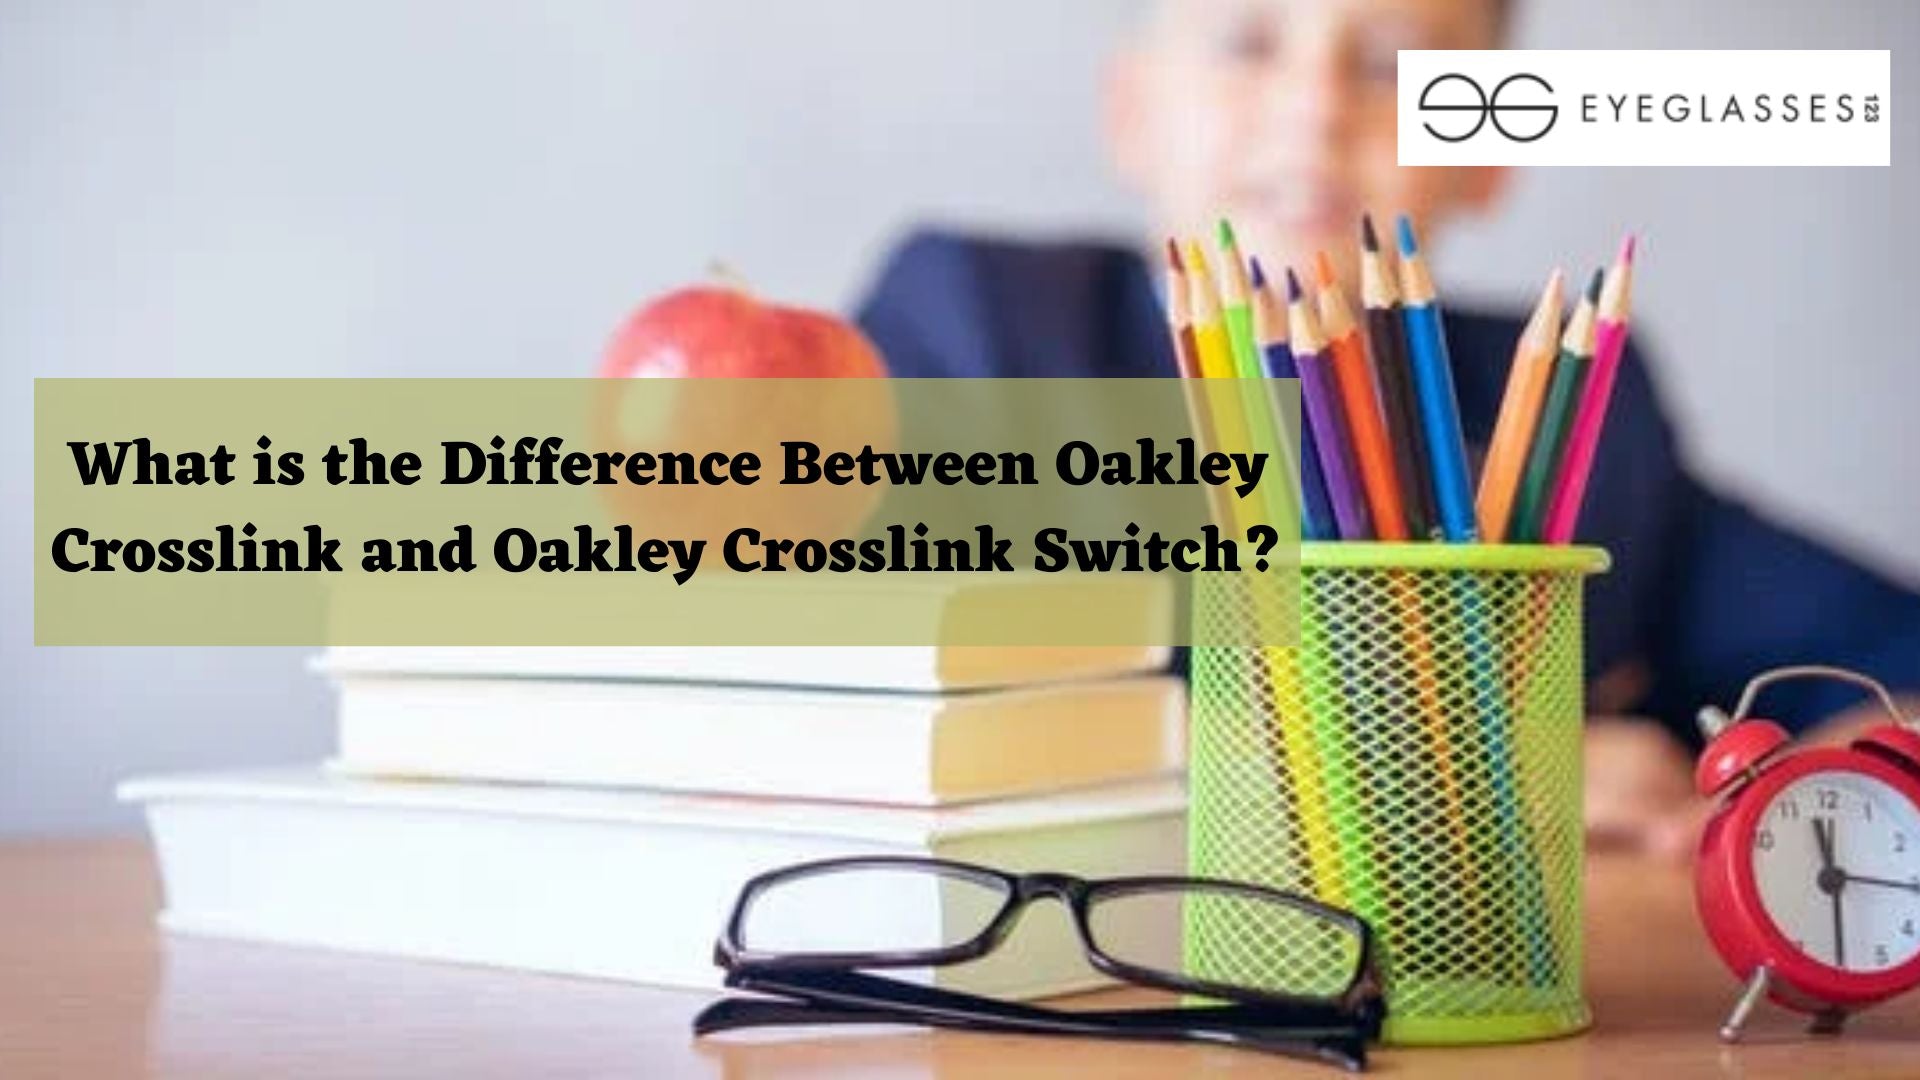 What is the Difference Between Oakley Crosslink and Oakley Crosslink Switch?